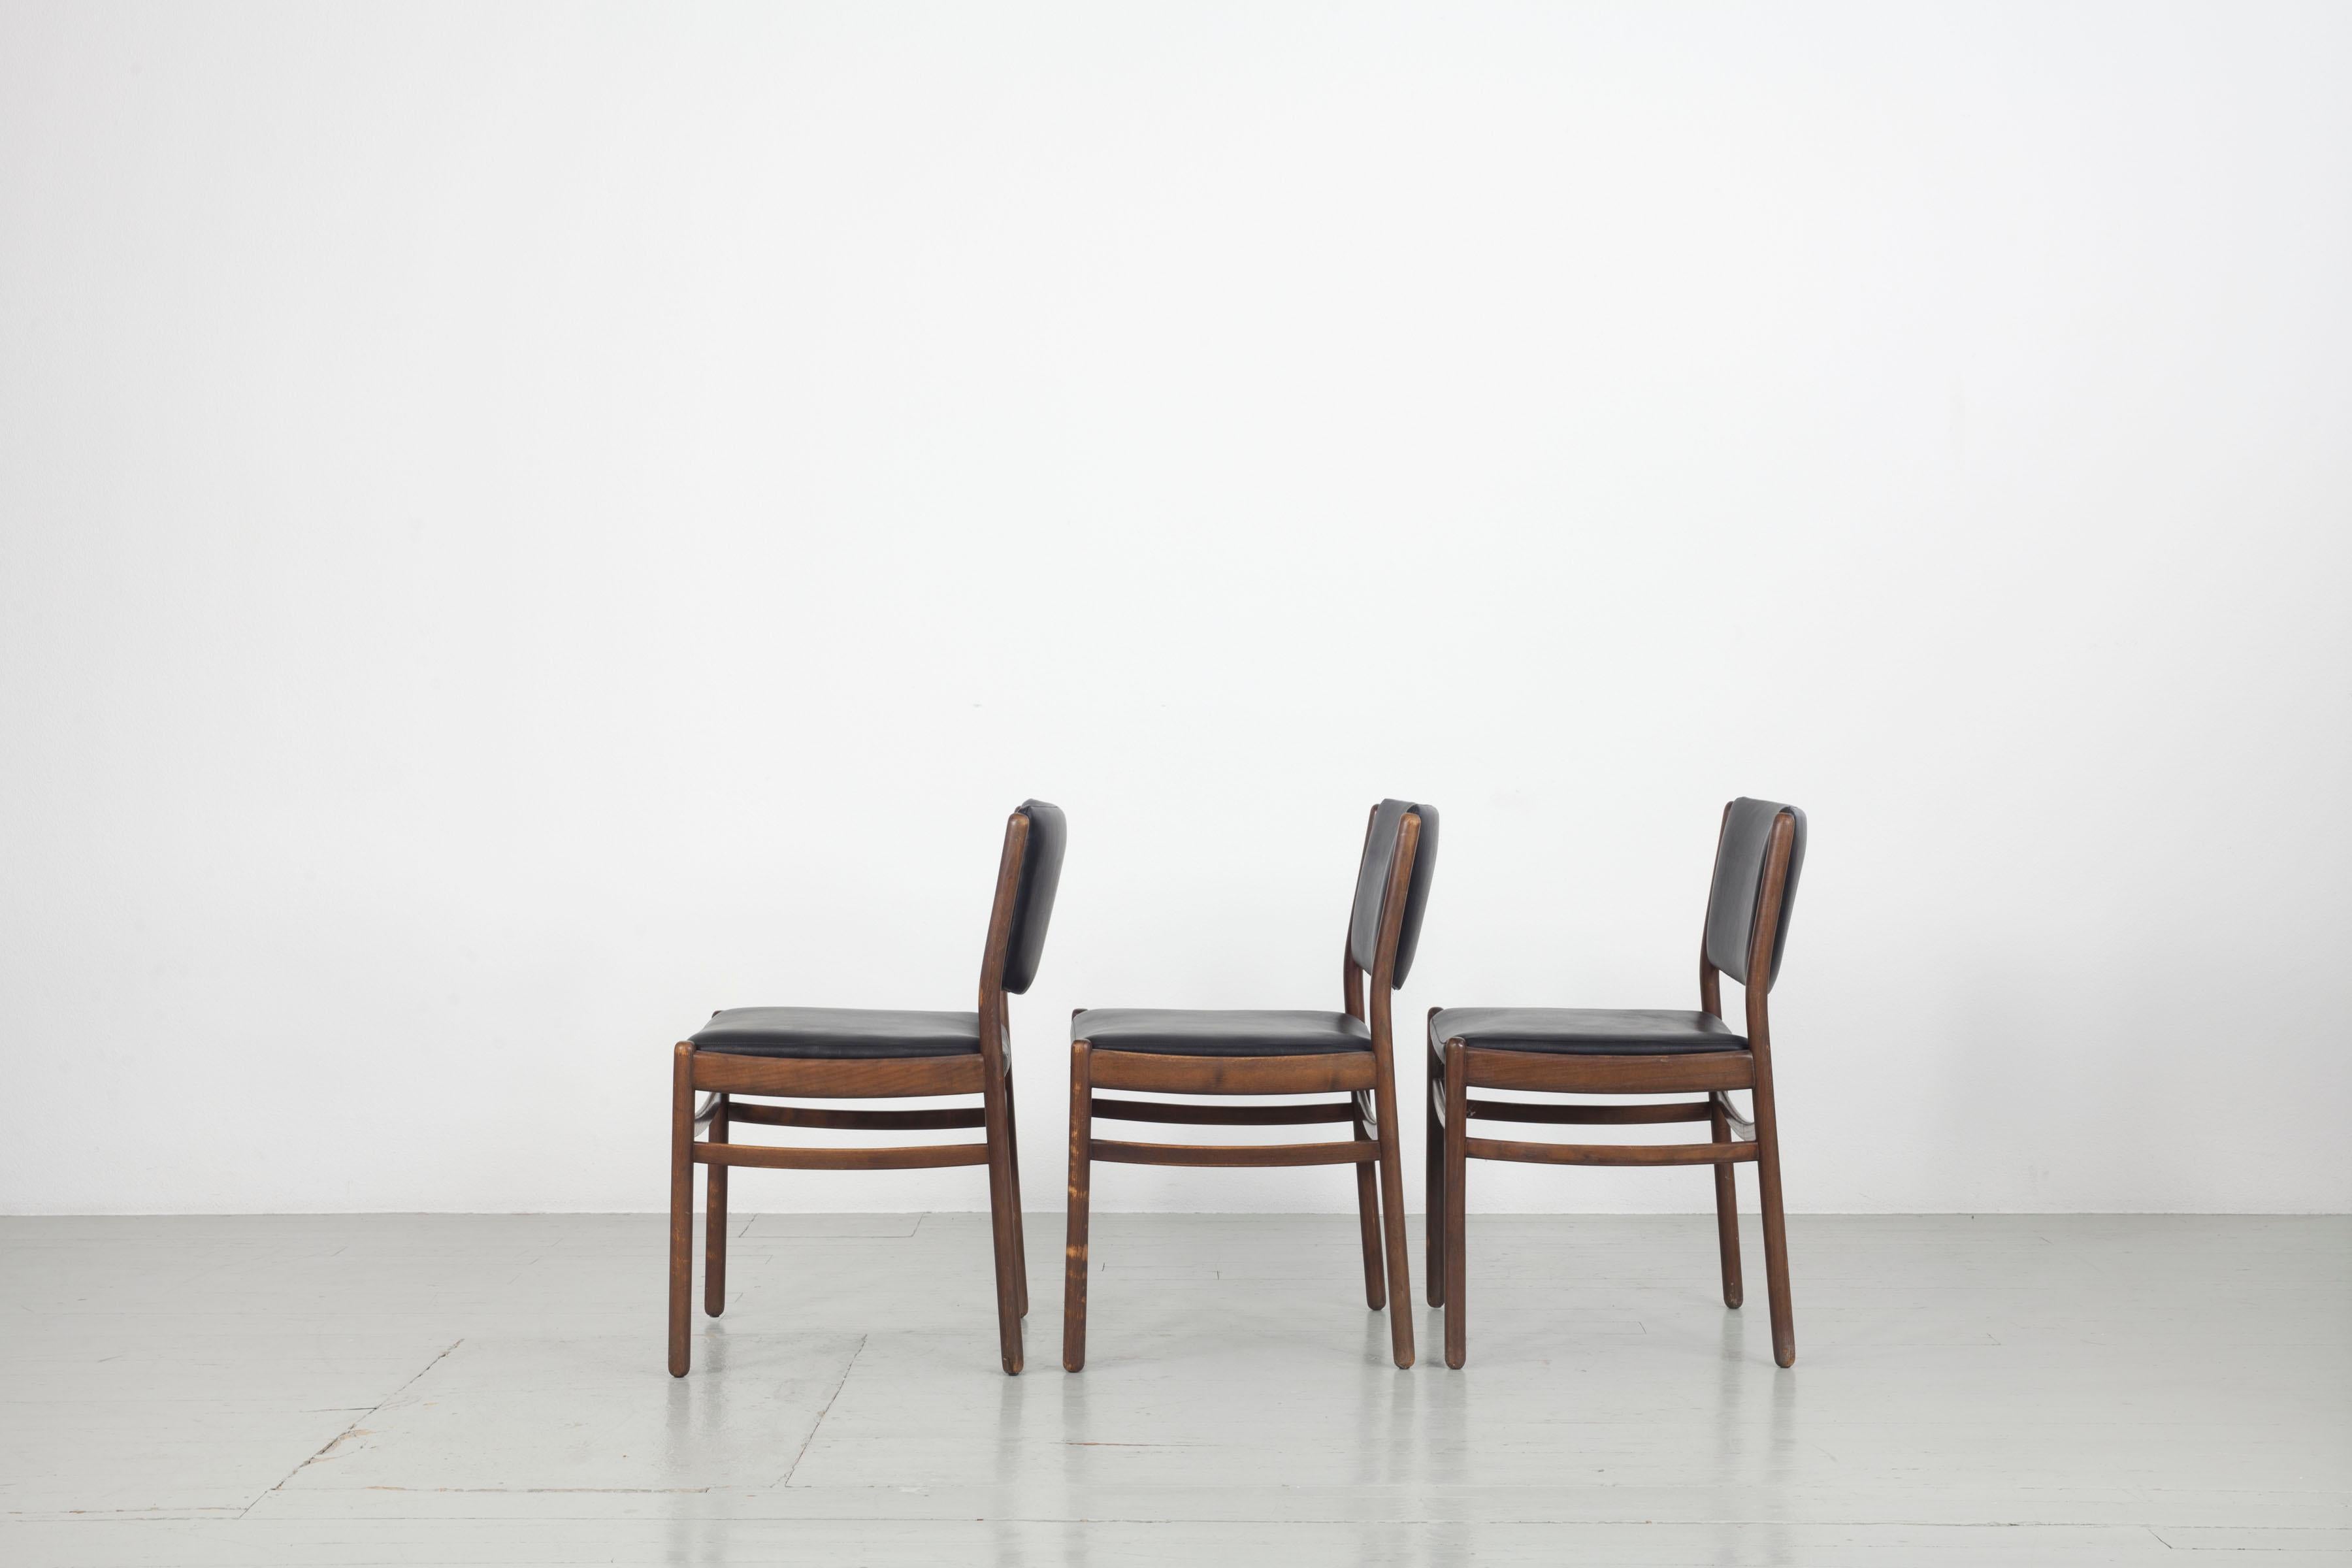 Mid-20th Century Set of Three Wooden Chairs with Black Leatherette Upholstery, Italy 60s For Sale